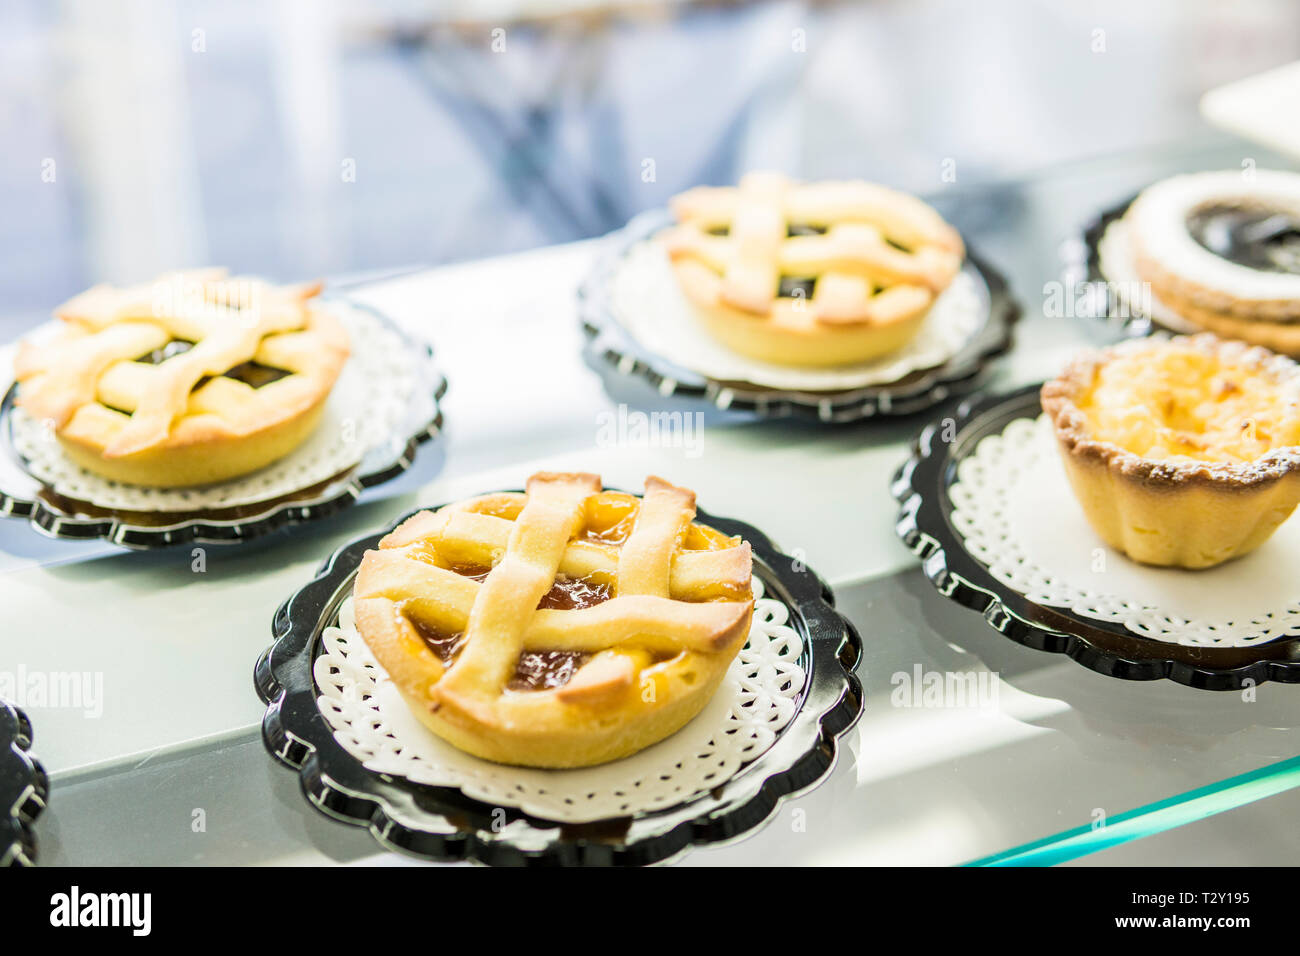 jam tarts and rice puddings on showcase of a pastry shop Stock Photo